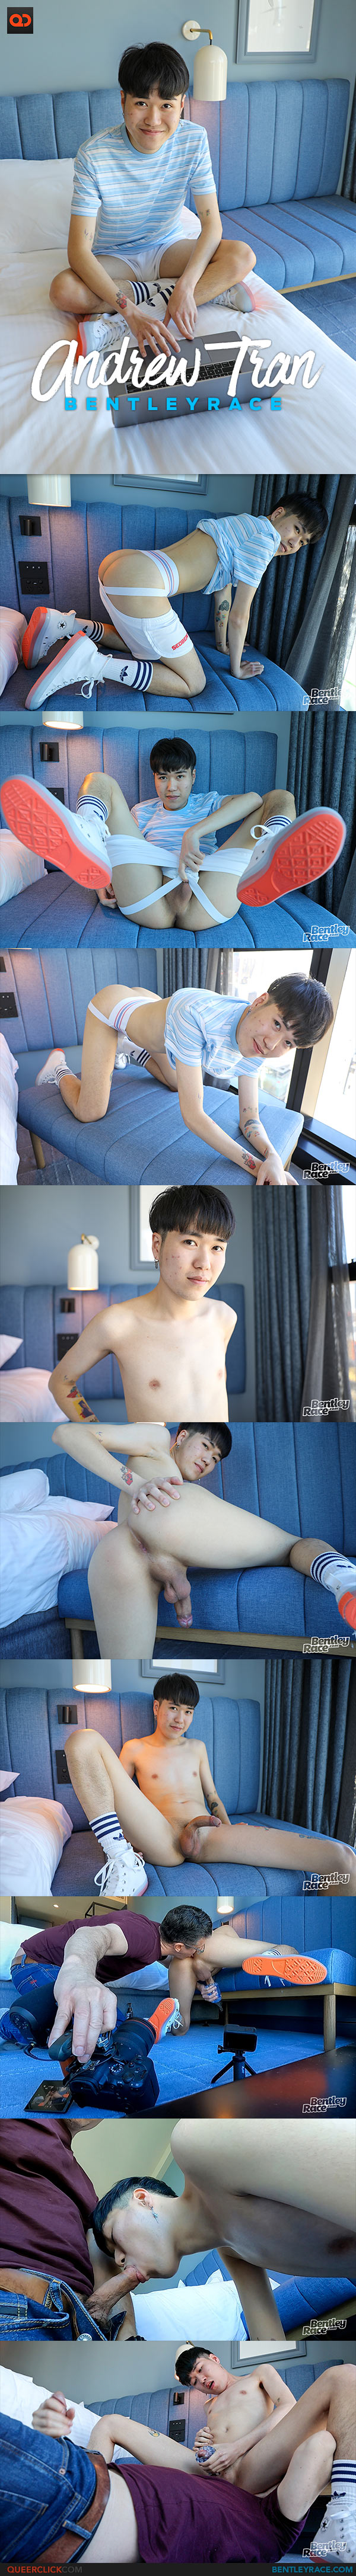 Bentley Race: Andrew Tran - Hotel Shooting With the Horny Mate